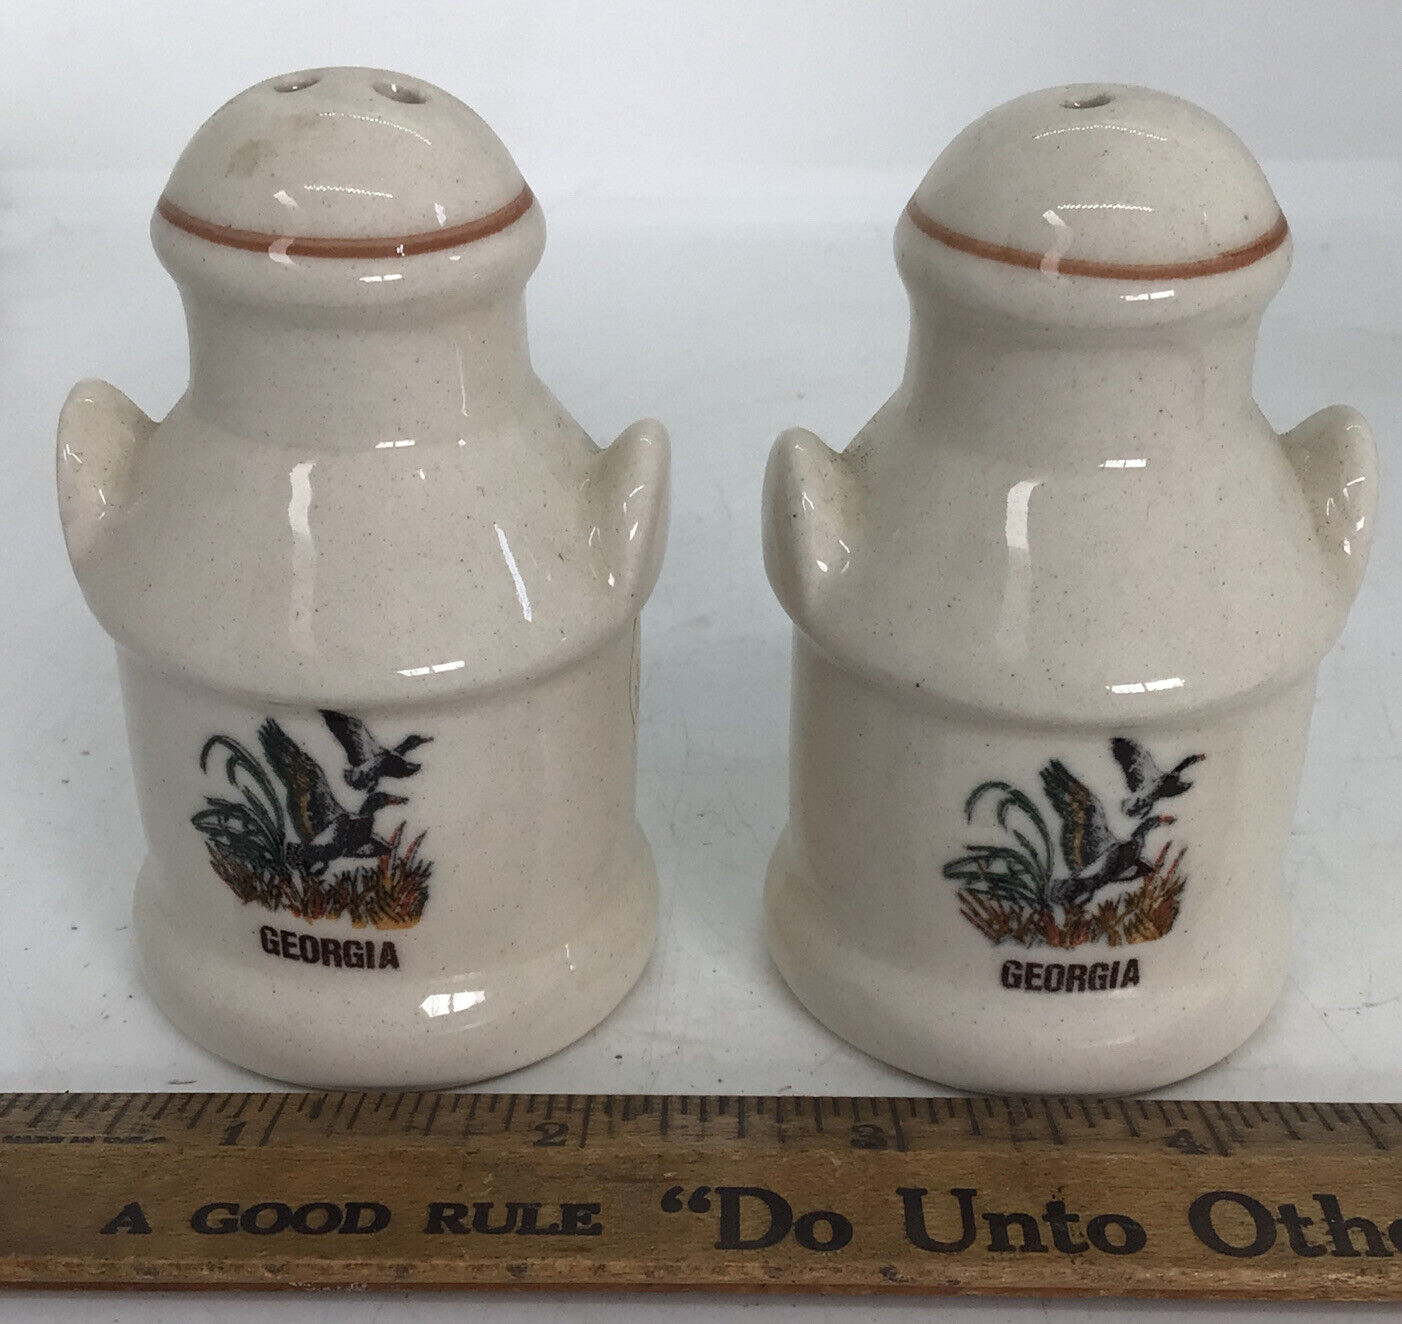 Georgia - Vintage Salt and Pepper Shakers Duck Printed Butter Churns Very Unique